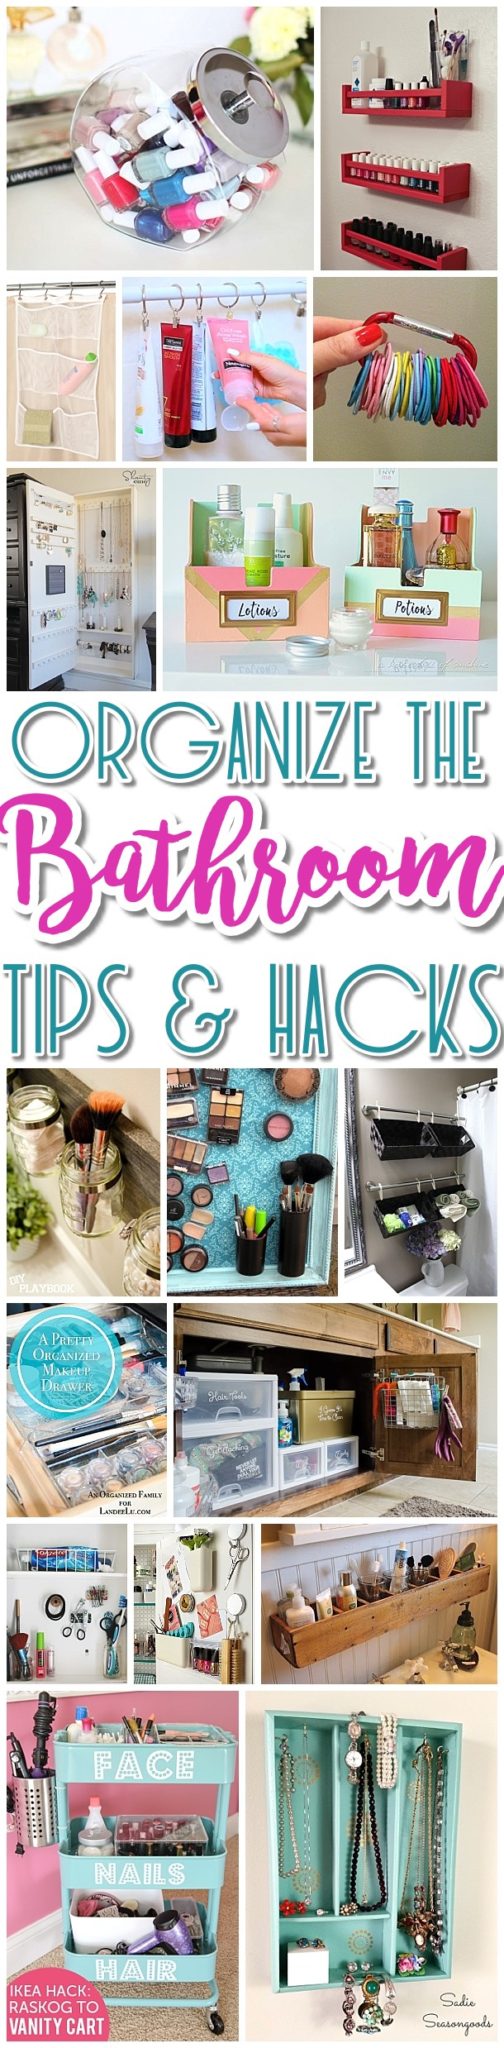 EASY Inexpensive Do it Yourself Ways to Organize and Decorate your Bathroom and Vanity -The BEST DIY Space Saving Projects and Organizing Ideas on a Budget - Dreaming in DIY #bathroomorganization #bathroomideas #bathroomhacks #bathroomtips #organizethebathroom